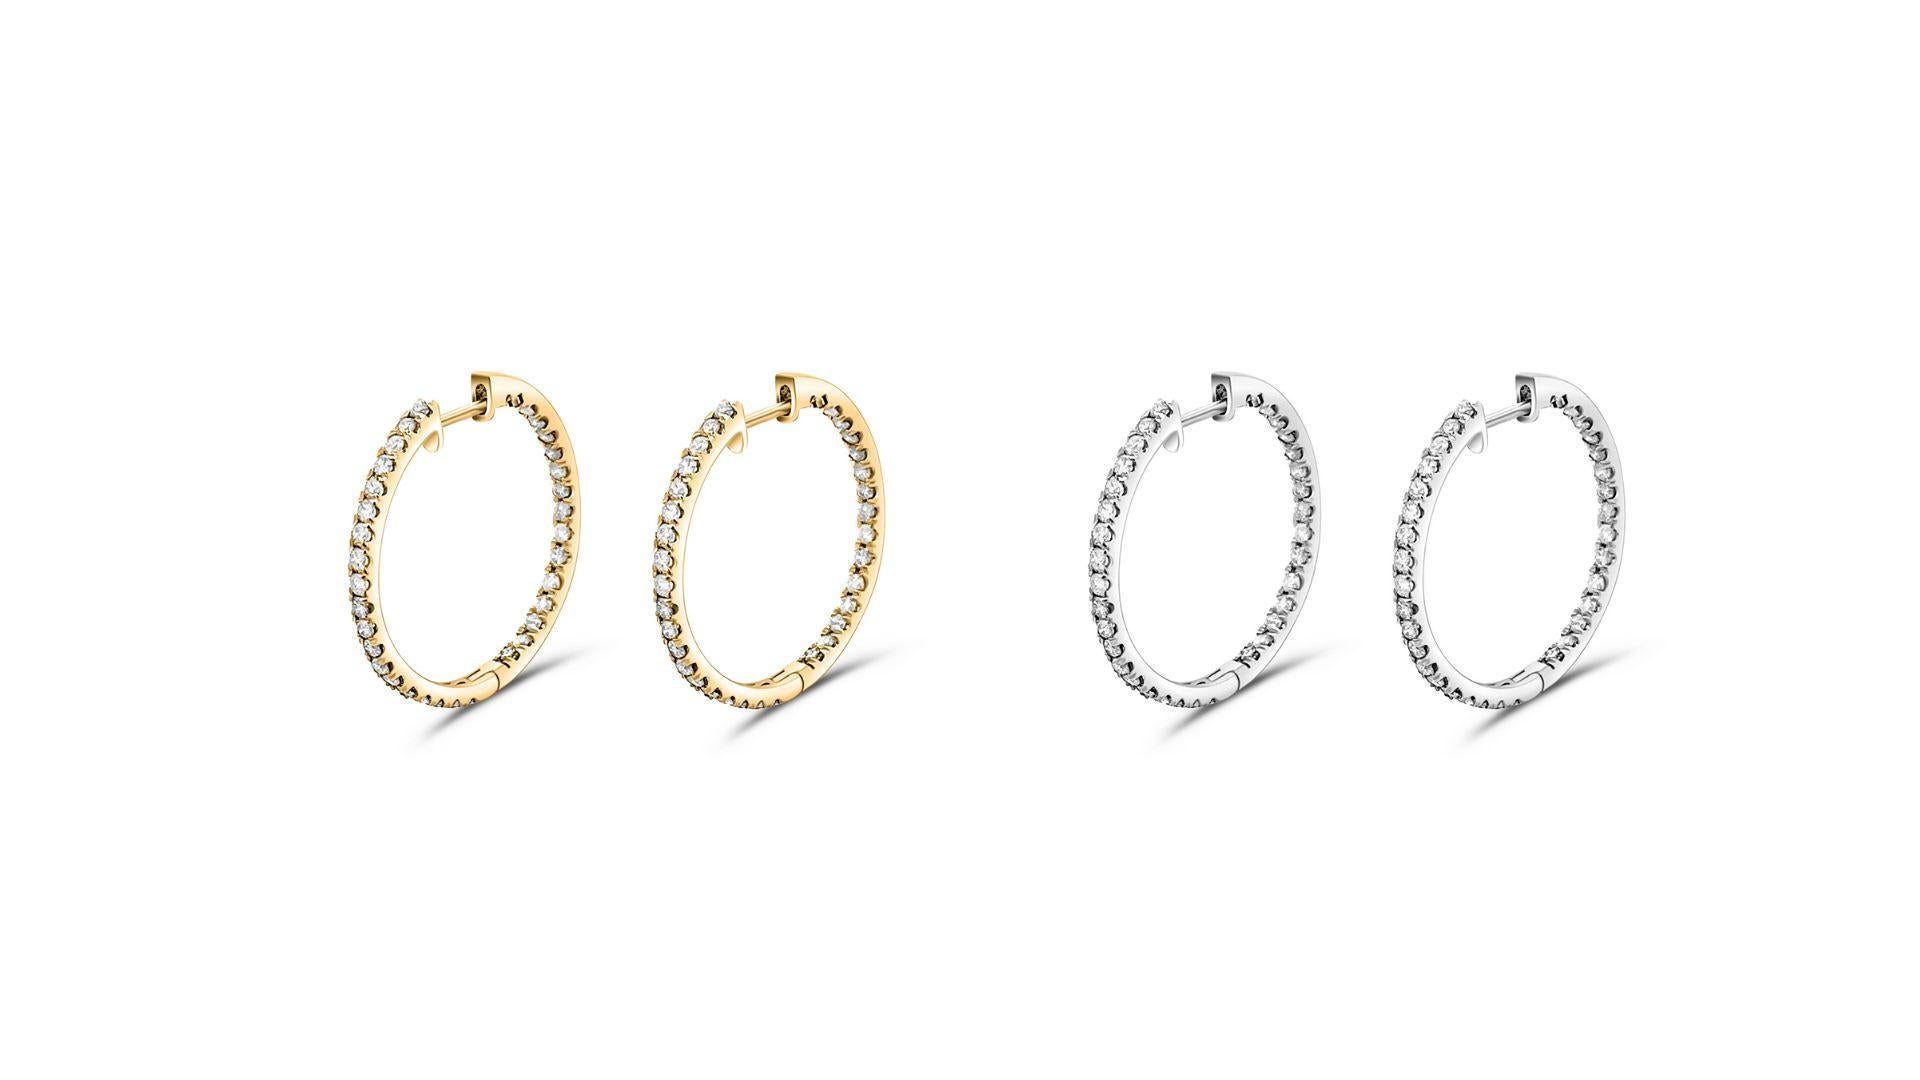 Natural diamond 1.20 CTTW pave classic inside-out eternity hoop earrings in 14k solid gold. Available in 14k white or yellow gold. 

These earrings have a secure latch closure that stays firm on the earlobe during wear, getting just the right amount